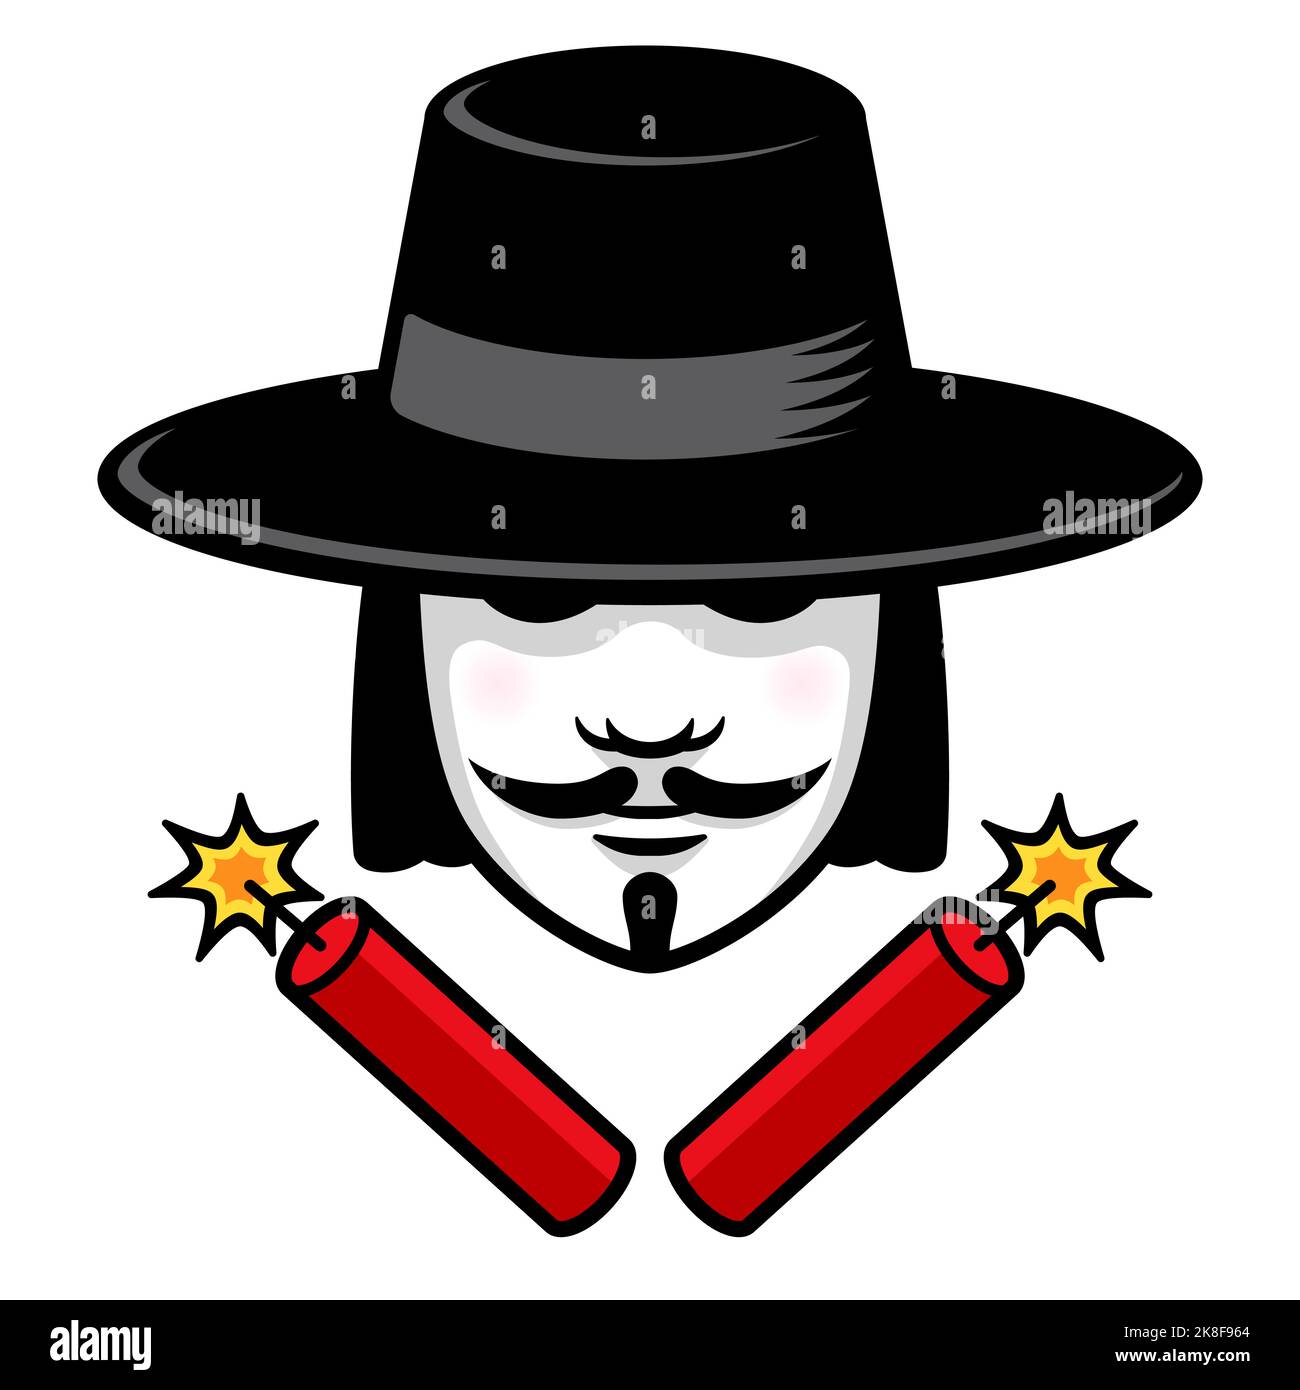 Guy Fawkes Night symbol, comic style logo with dynamite. Vector illustration. Stock Vector